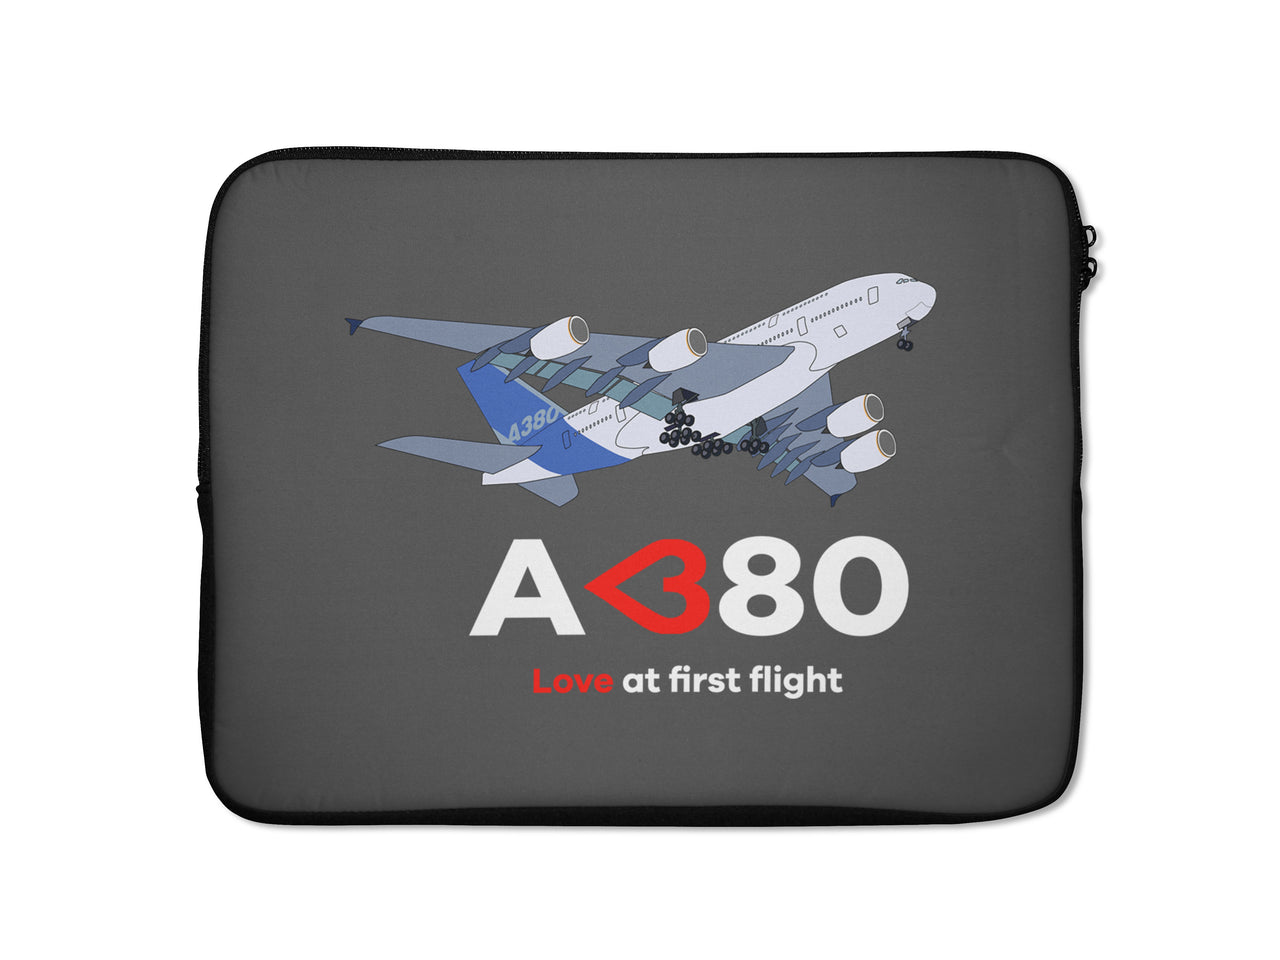 Airbus A380 Love at first flight Designed Laptop & Tablet Cases